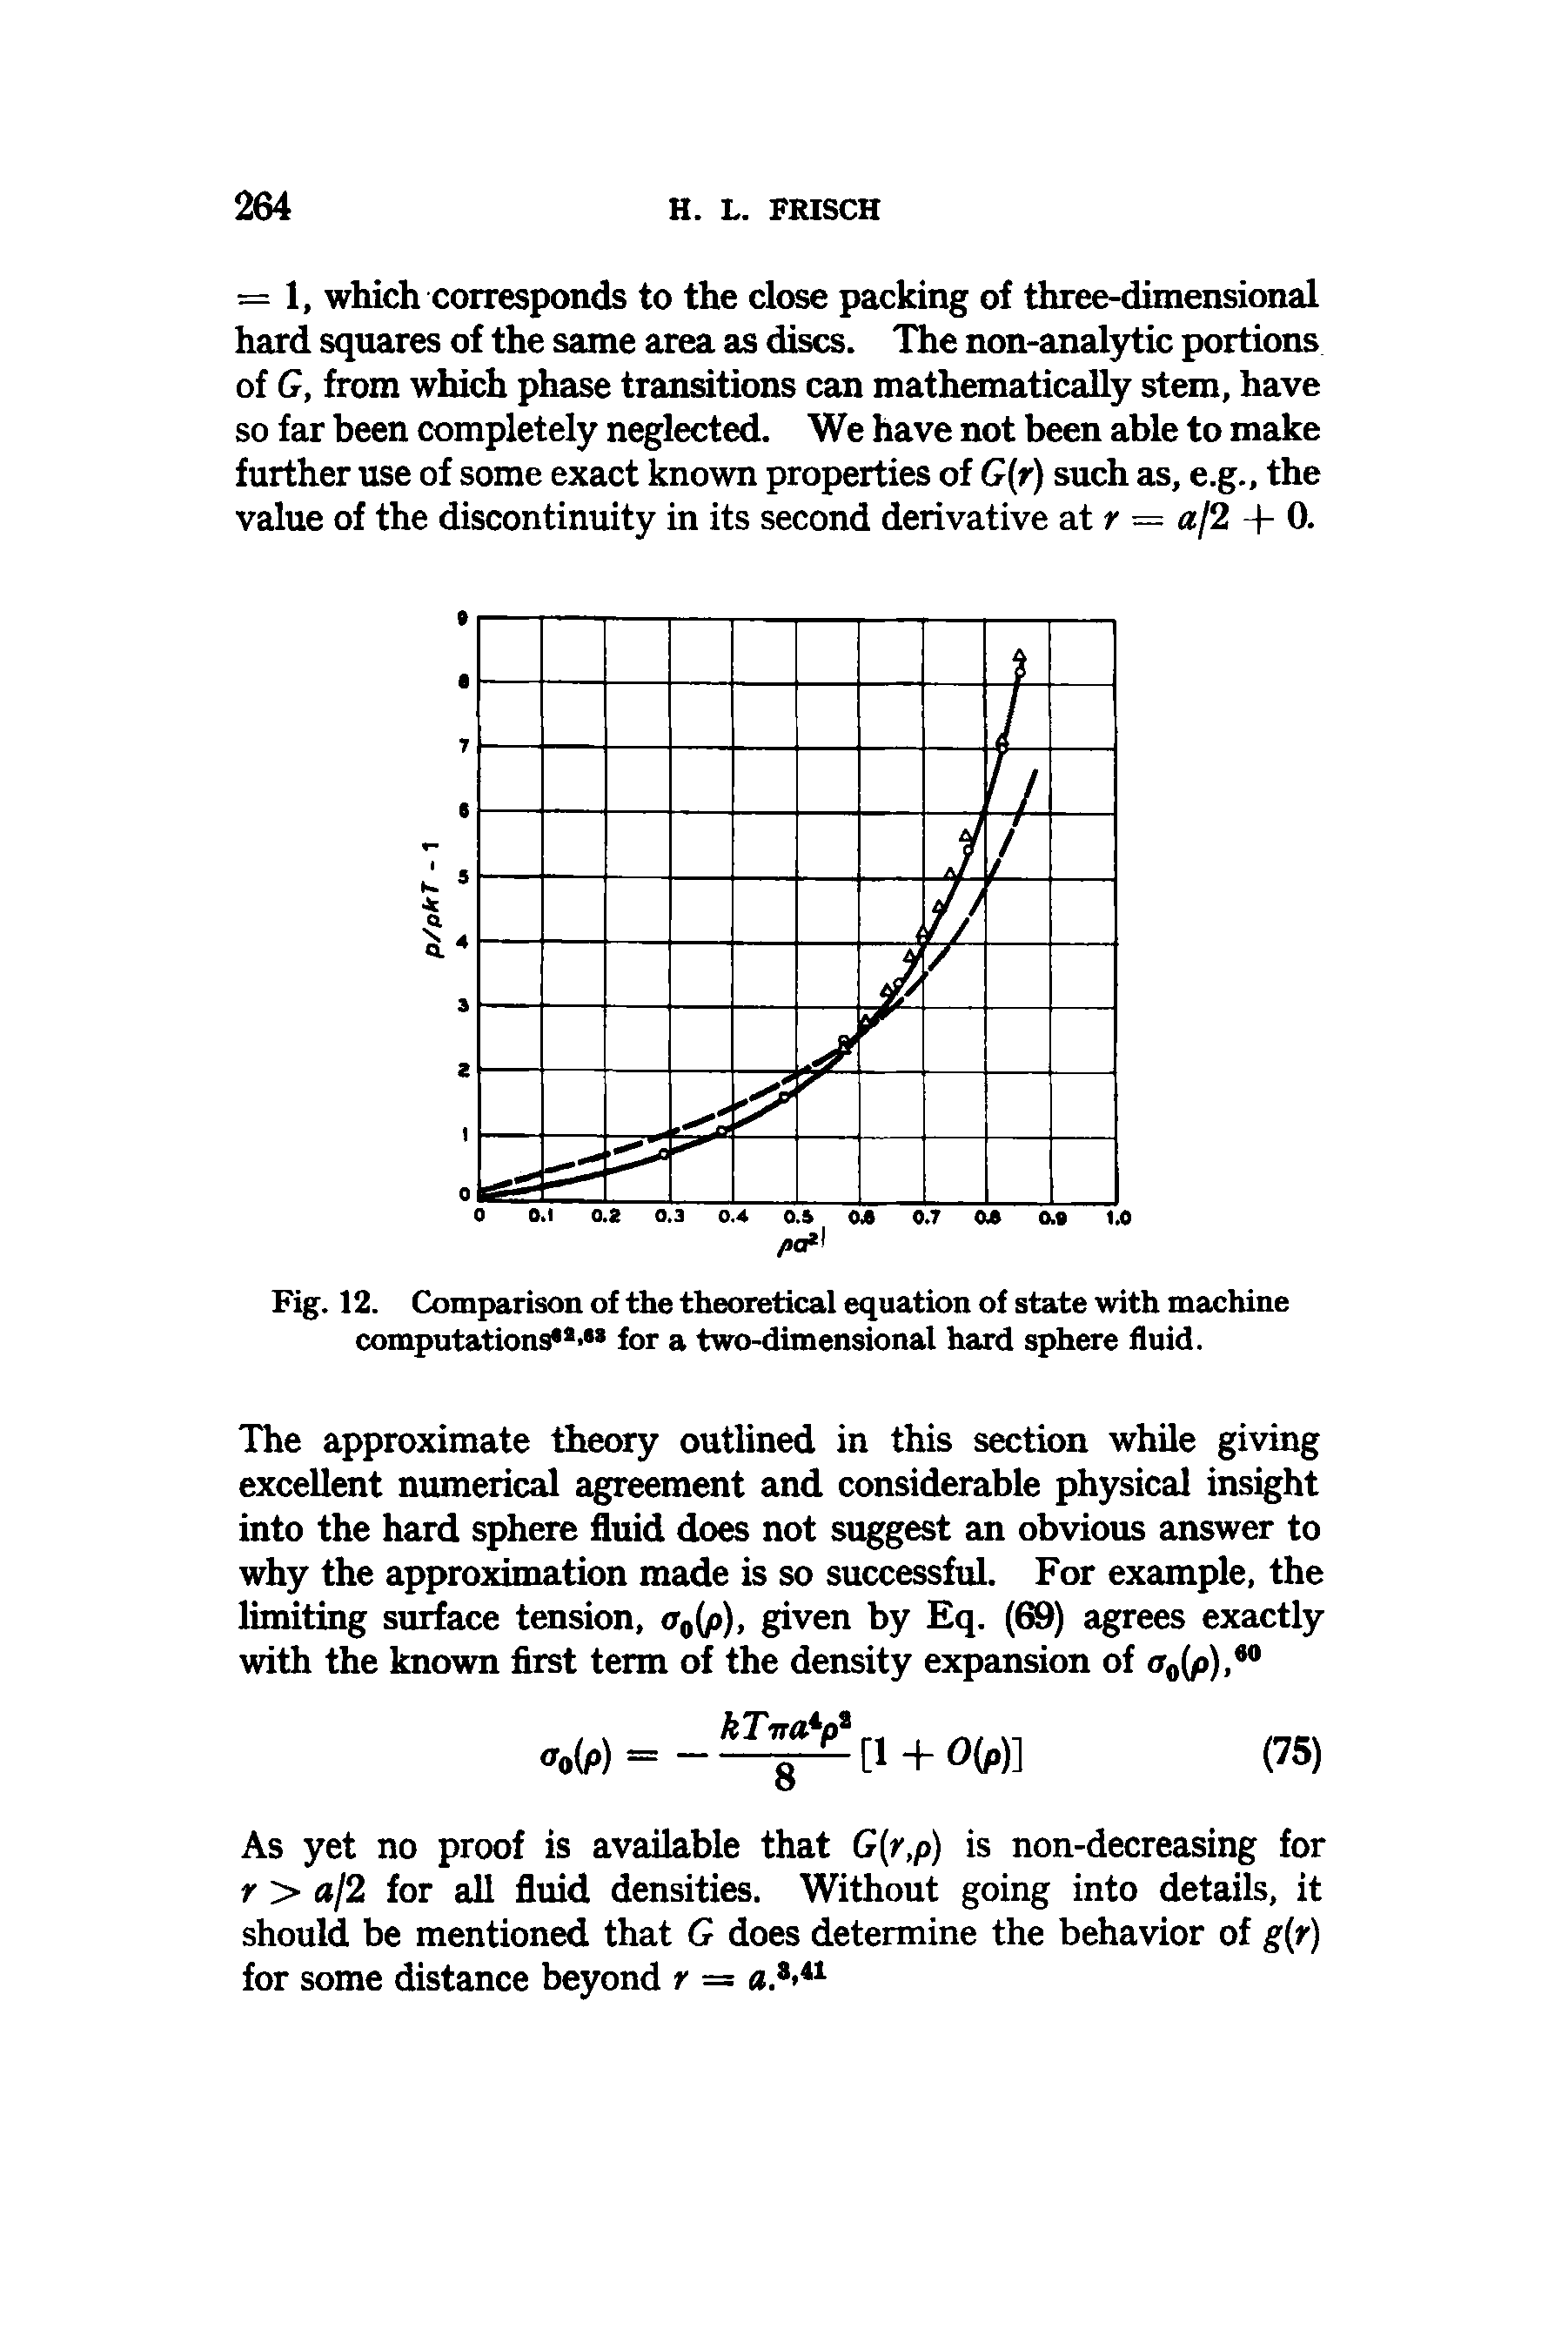 Fig. 12. Comparison of the theoretical equation of state with machine computations for a two-dimensional hard sphere fluid.